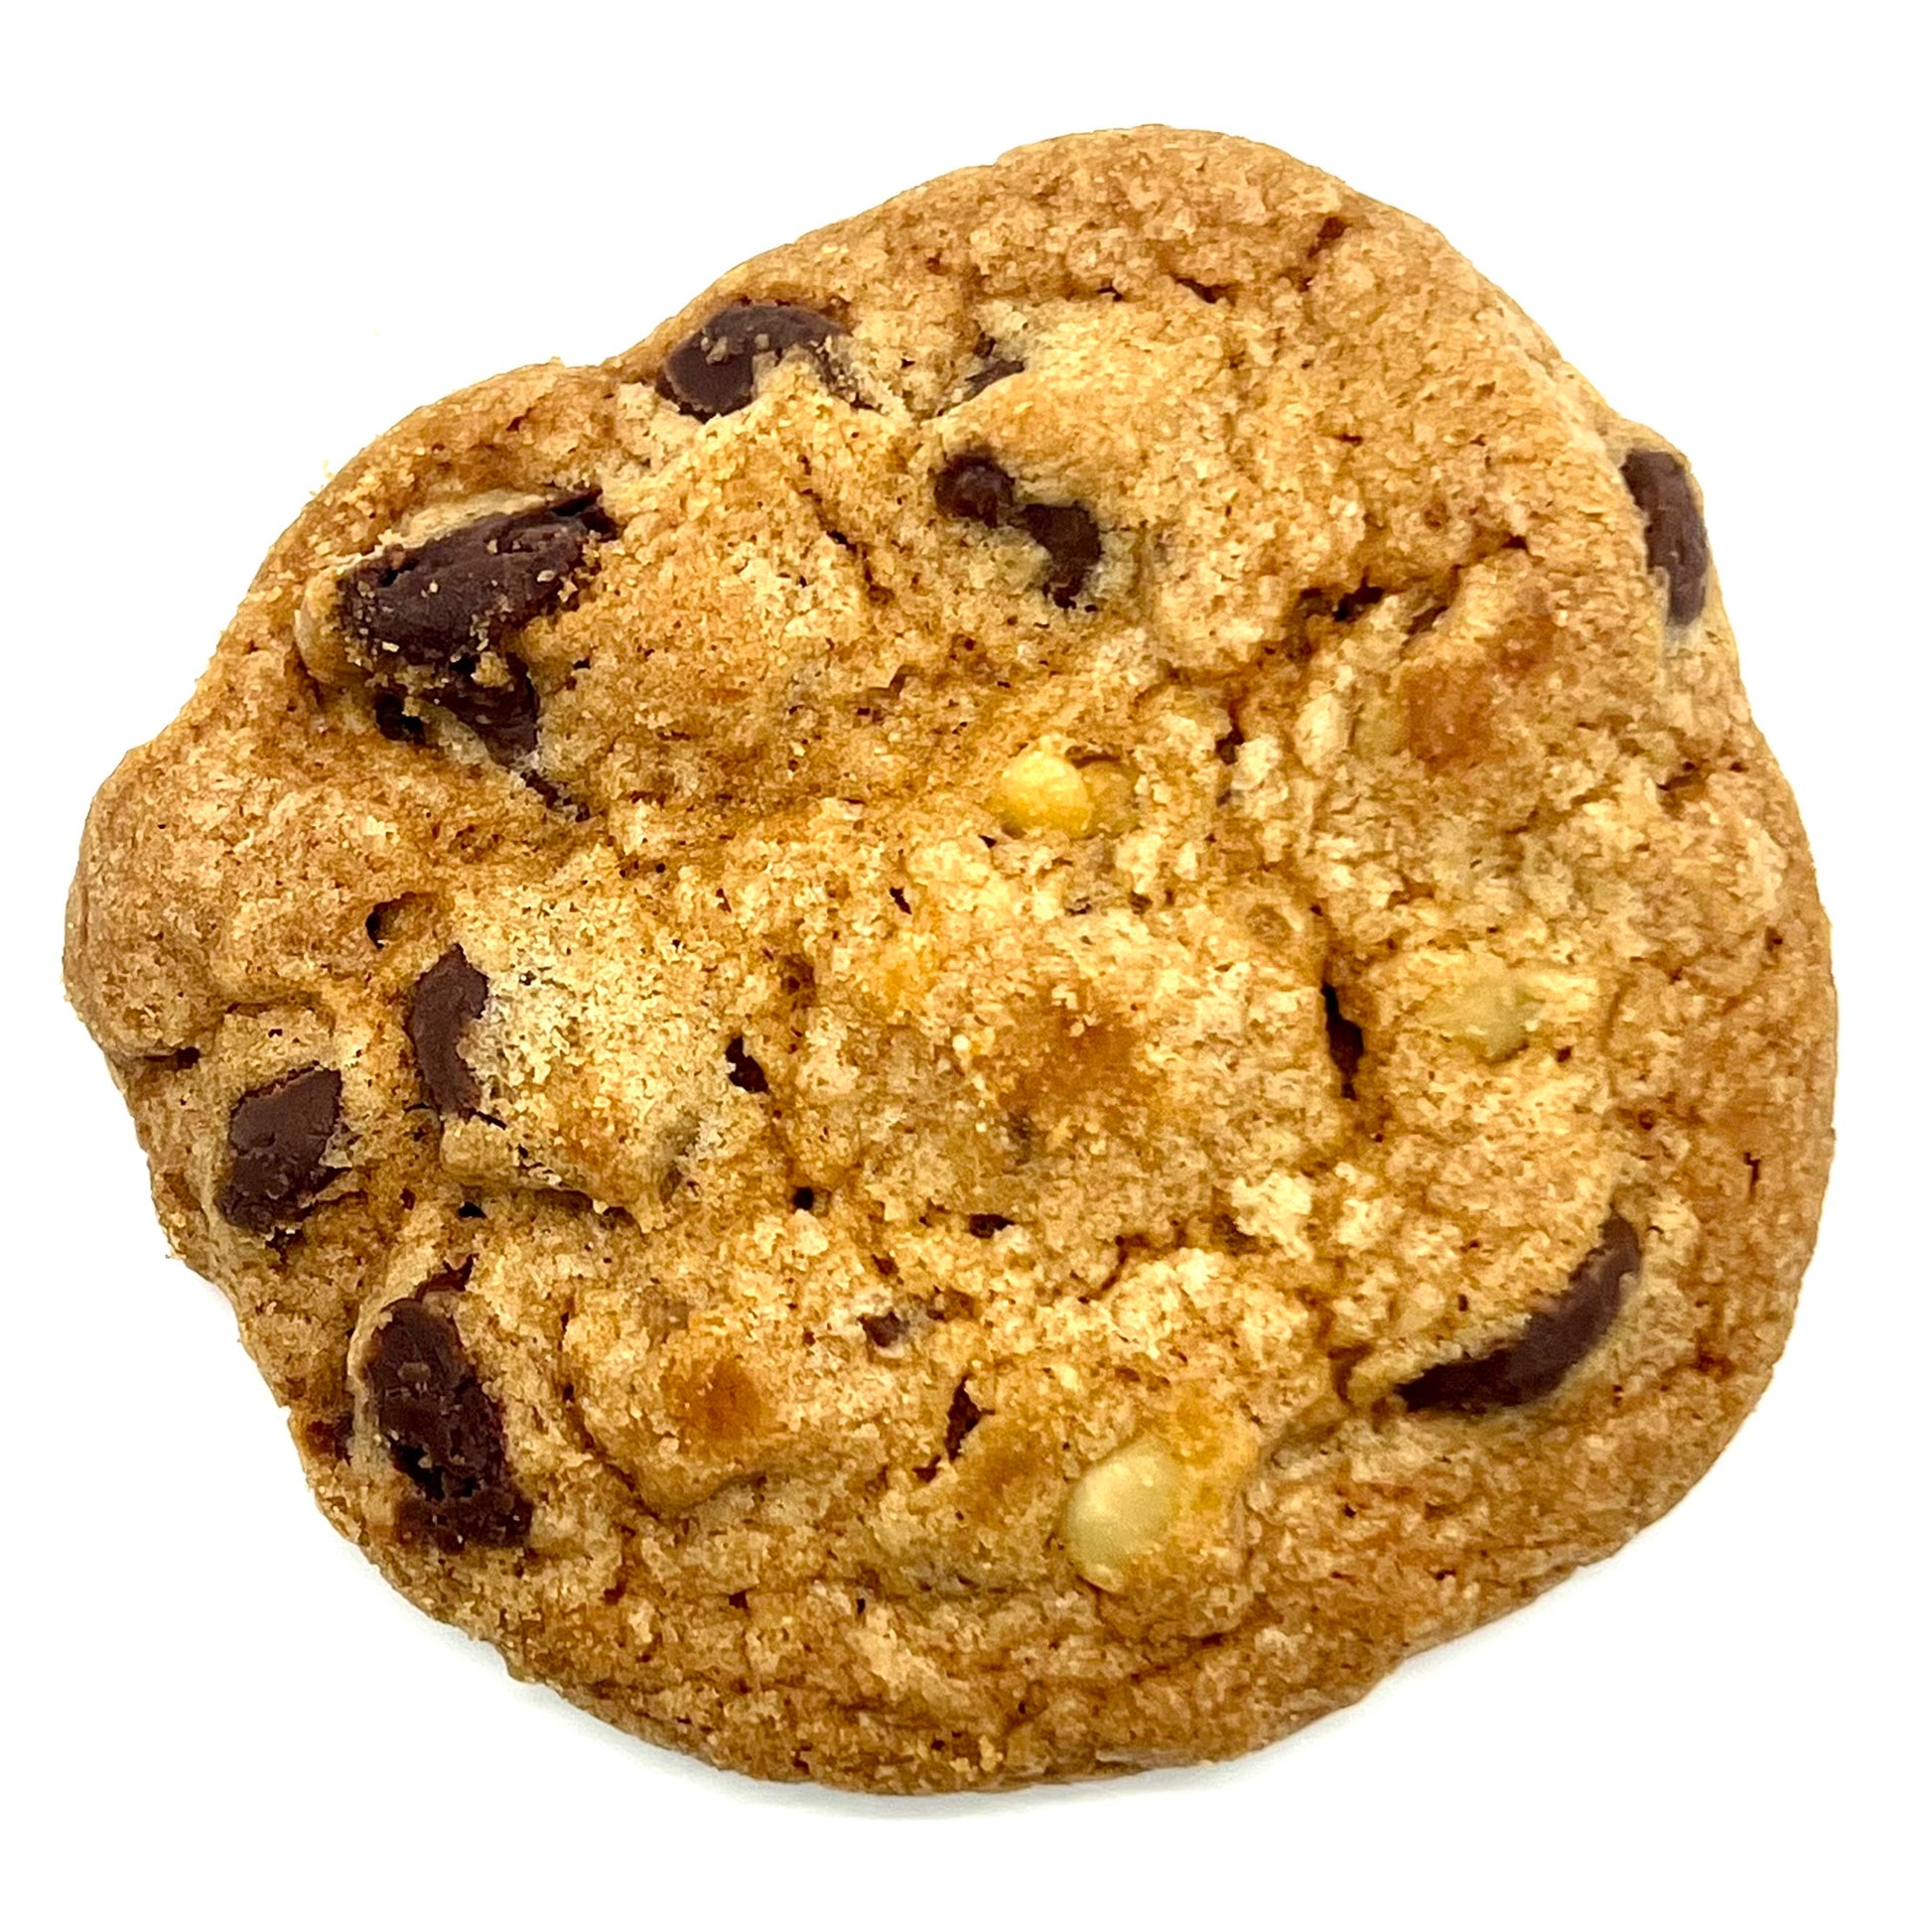 Chocolate Chip (W/ Walnuts) - Wholesale Unlimited Inc.